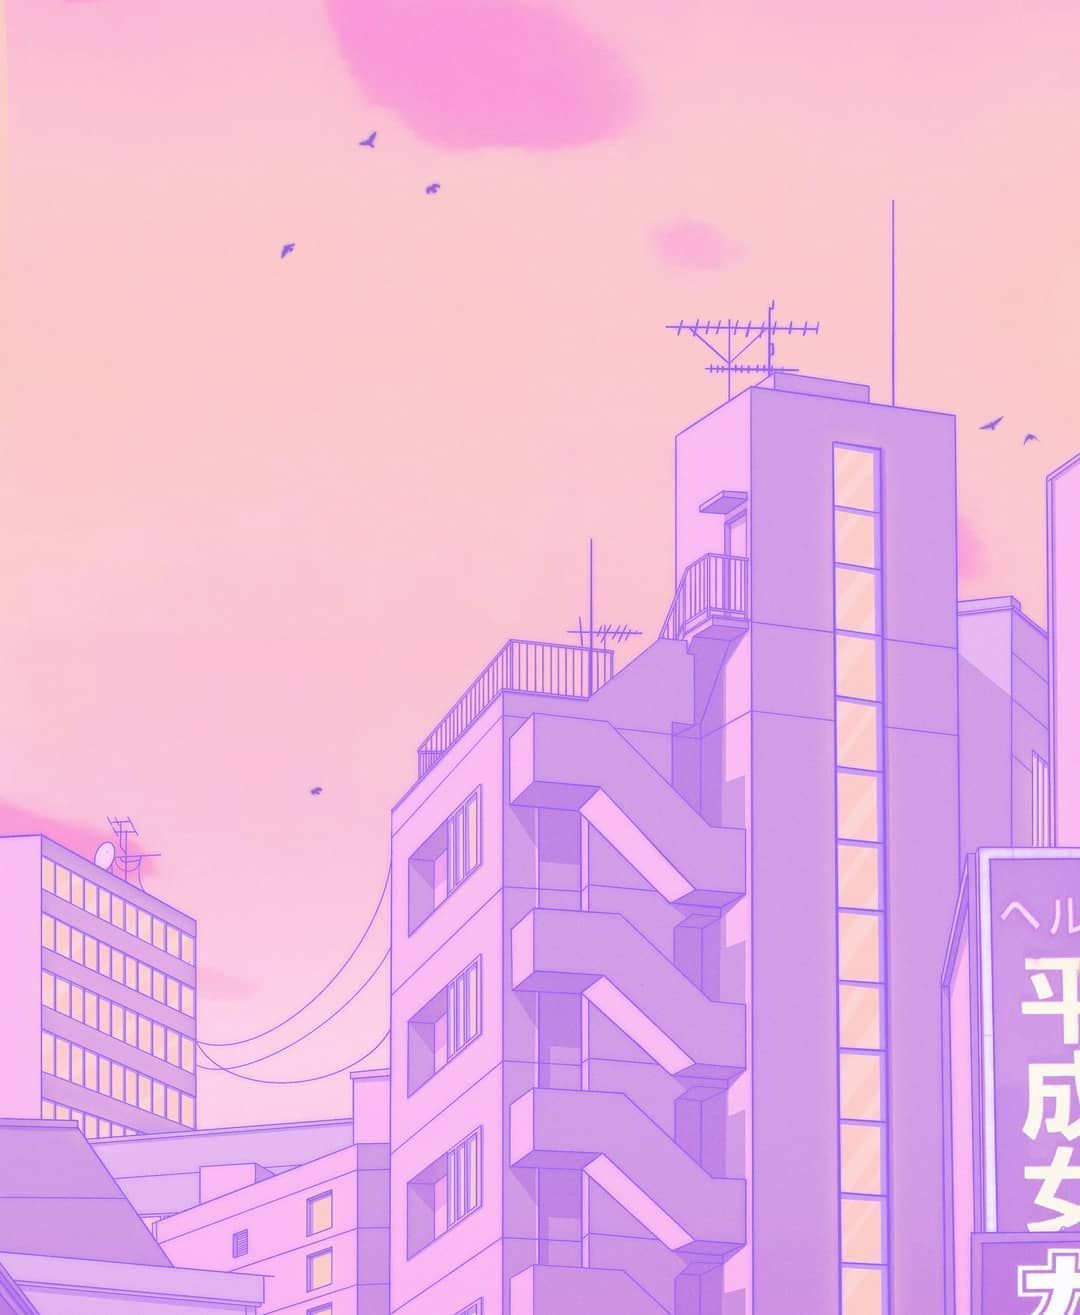 Tokyo ValentinePrints available on my Store, link in bio